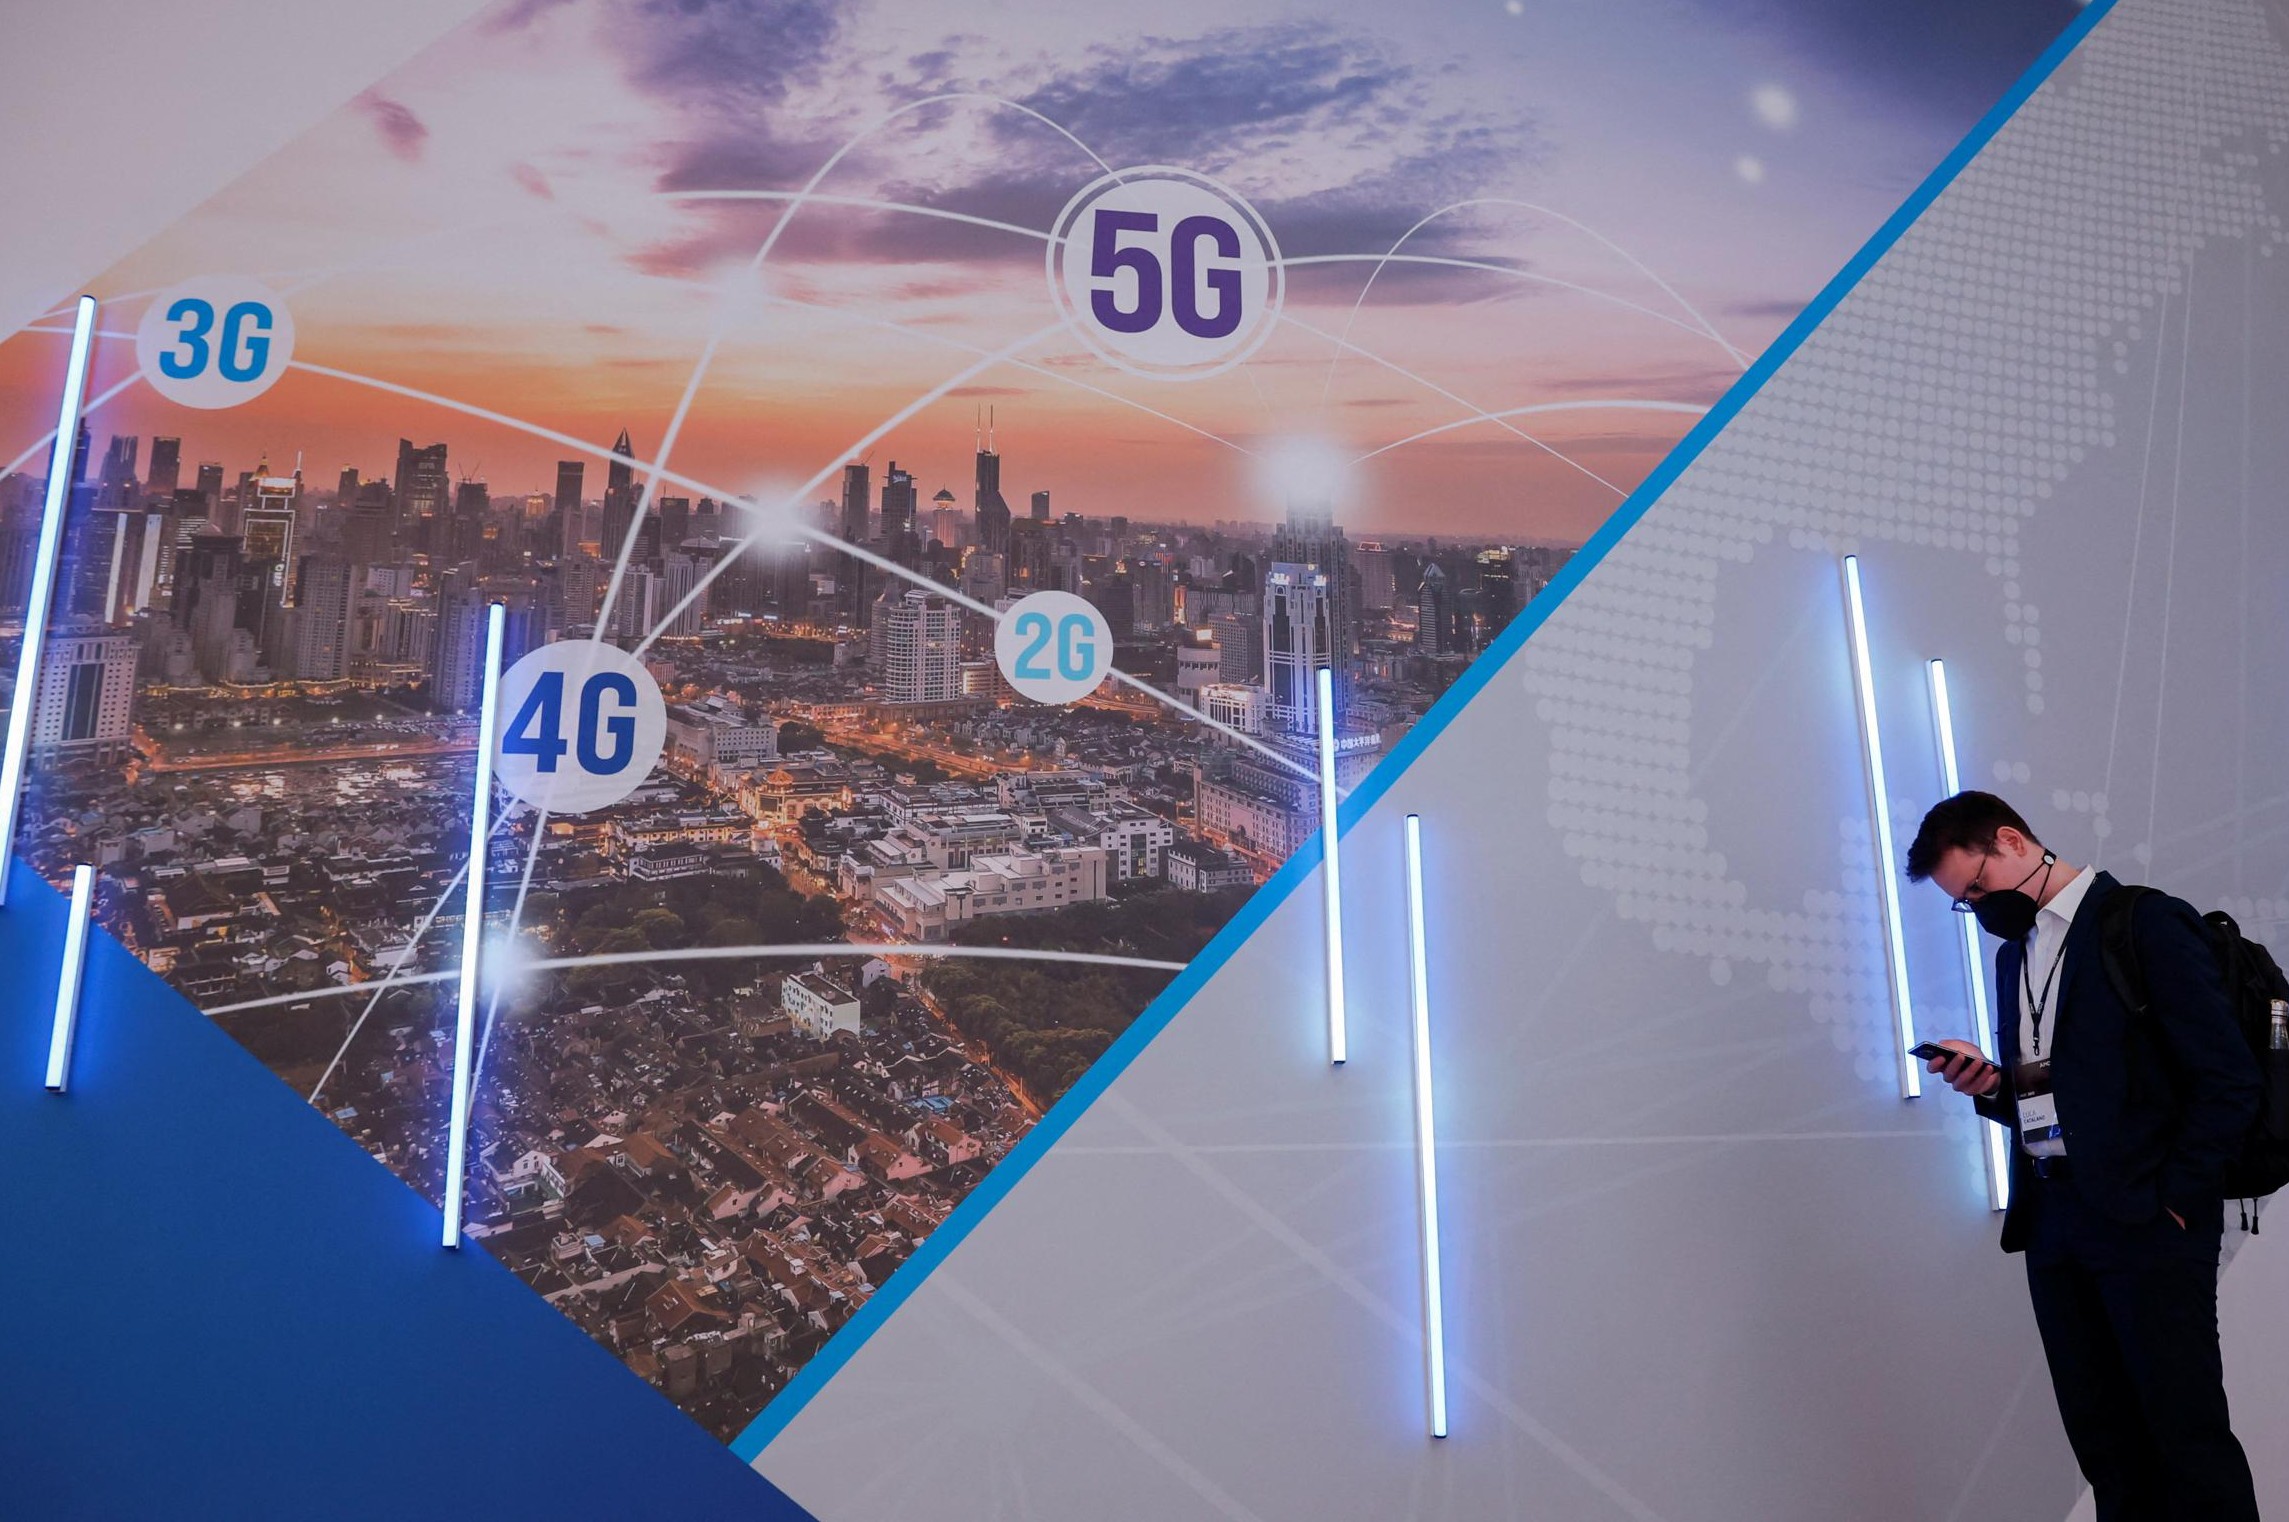 Not four, but five candidates for 5G auction in our country: will there be an extra player on the market?  And what does that mean for the prices?